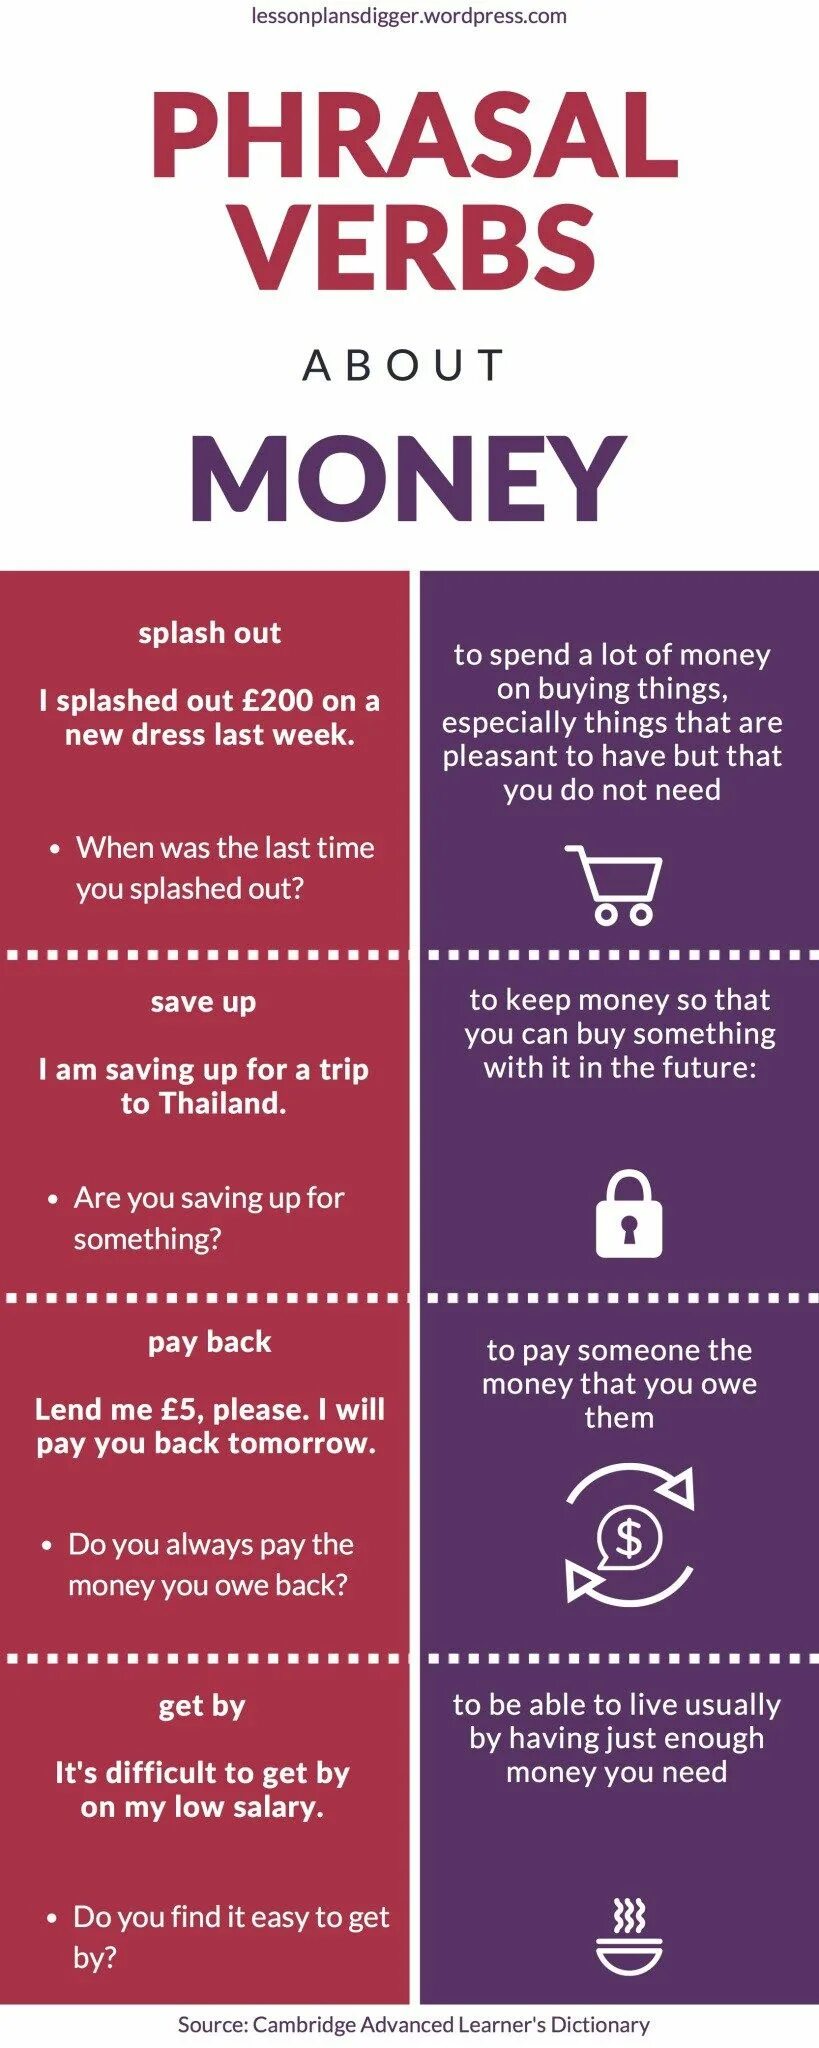 Money Phrasal verbs. Interesting facts about money. Verbs with money. Phrasal verbs about shopping and money.